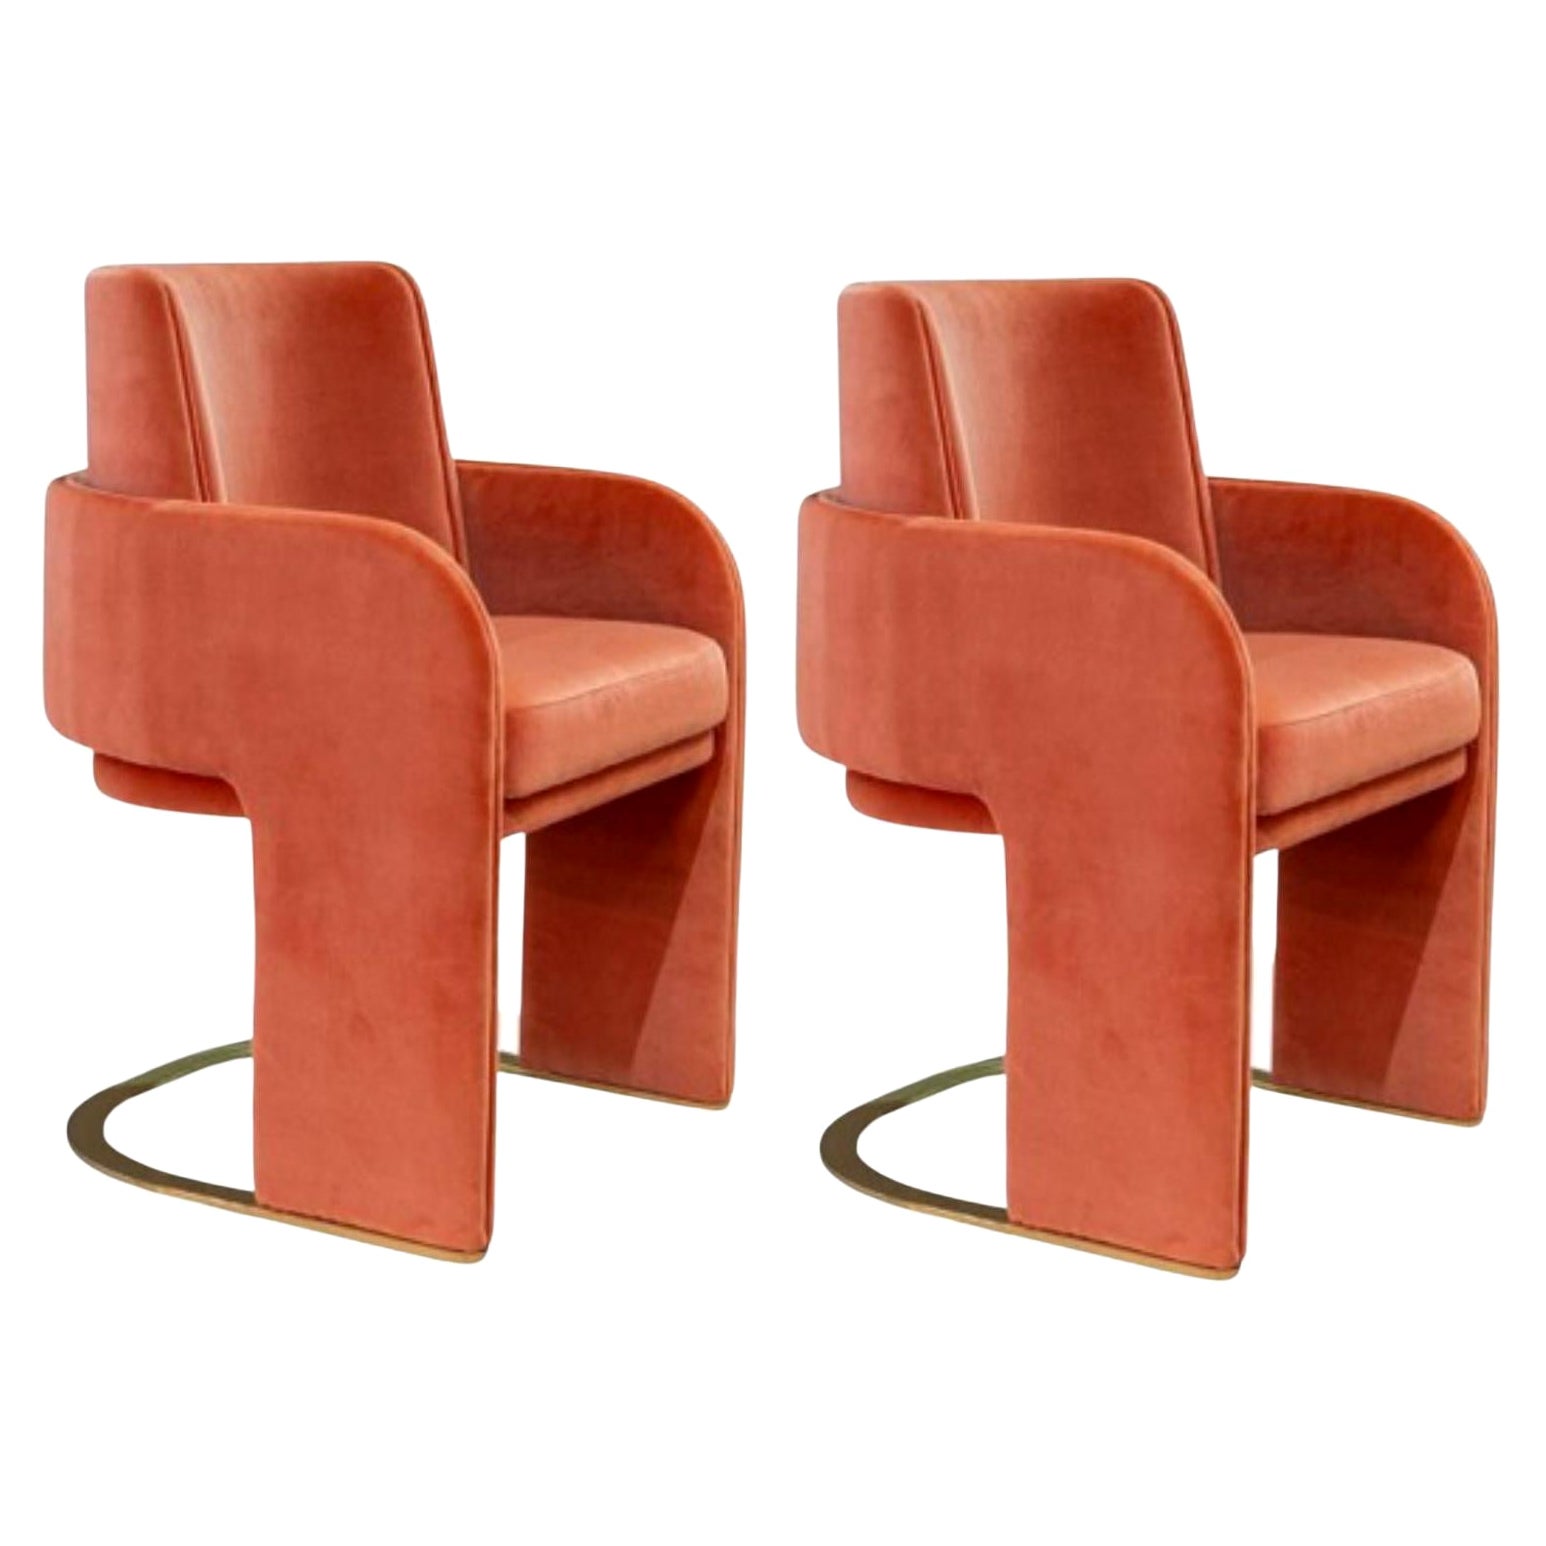 Set of 2 Odisseia Chairs by Dooq For Sale